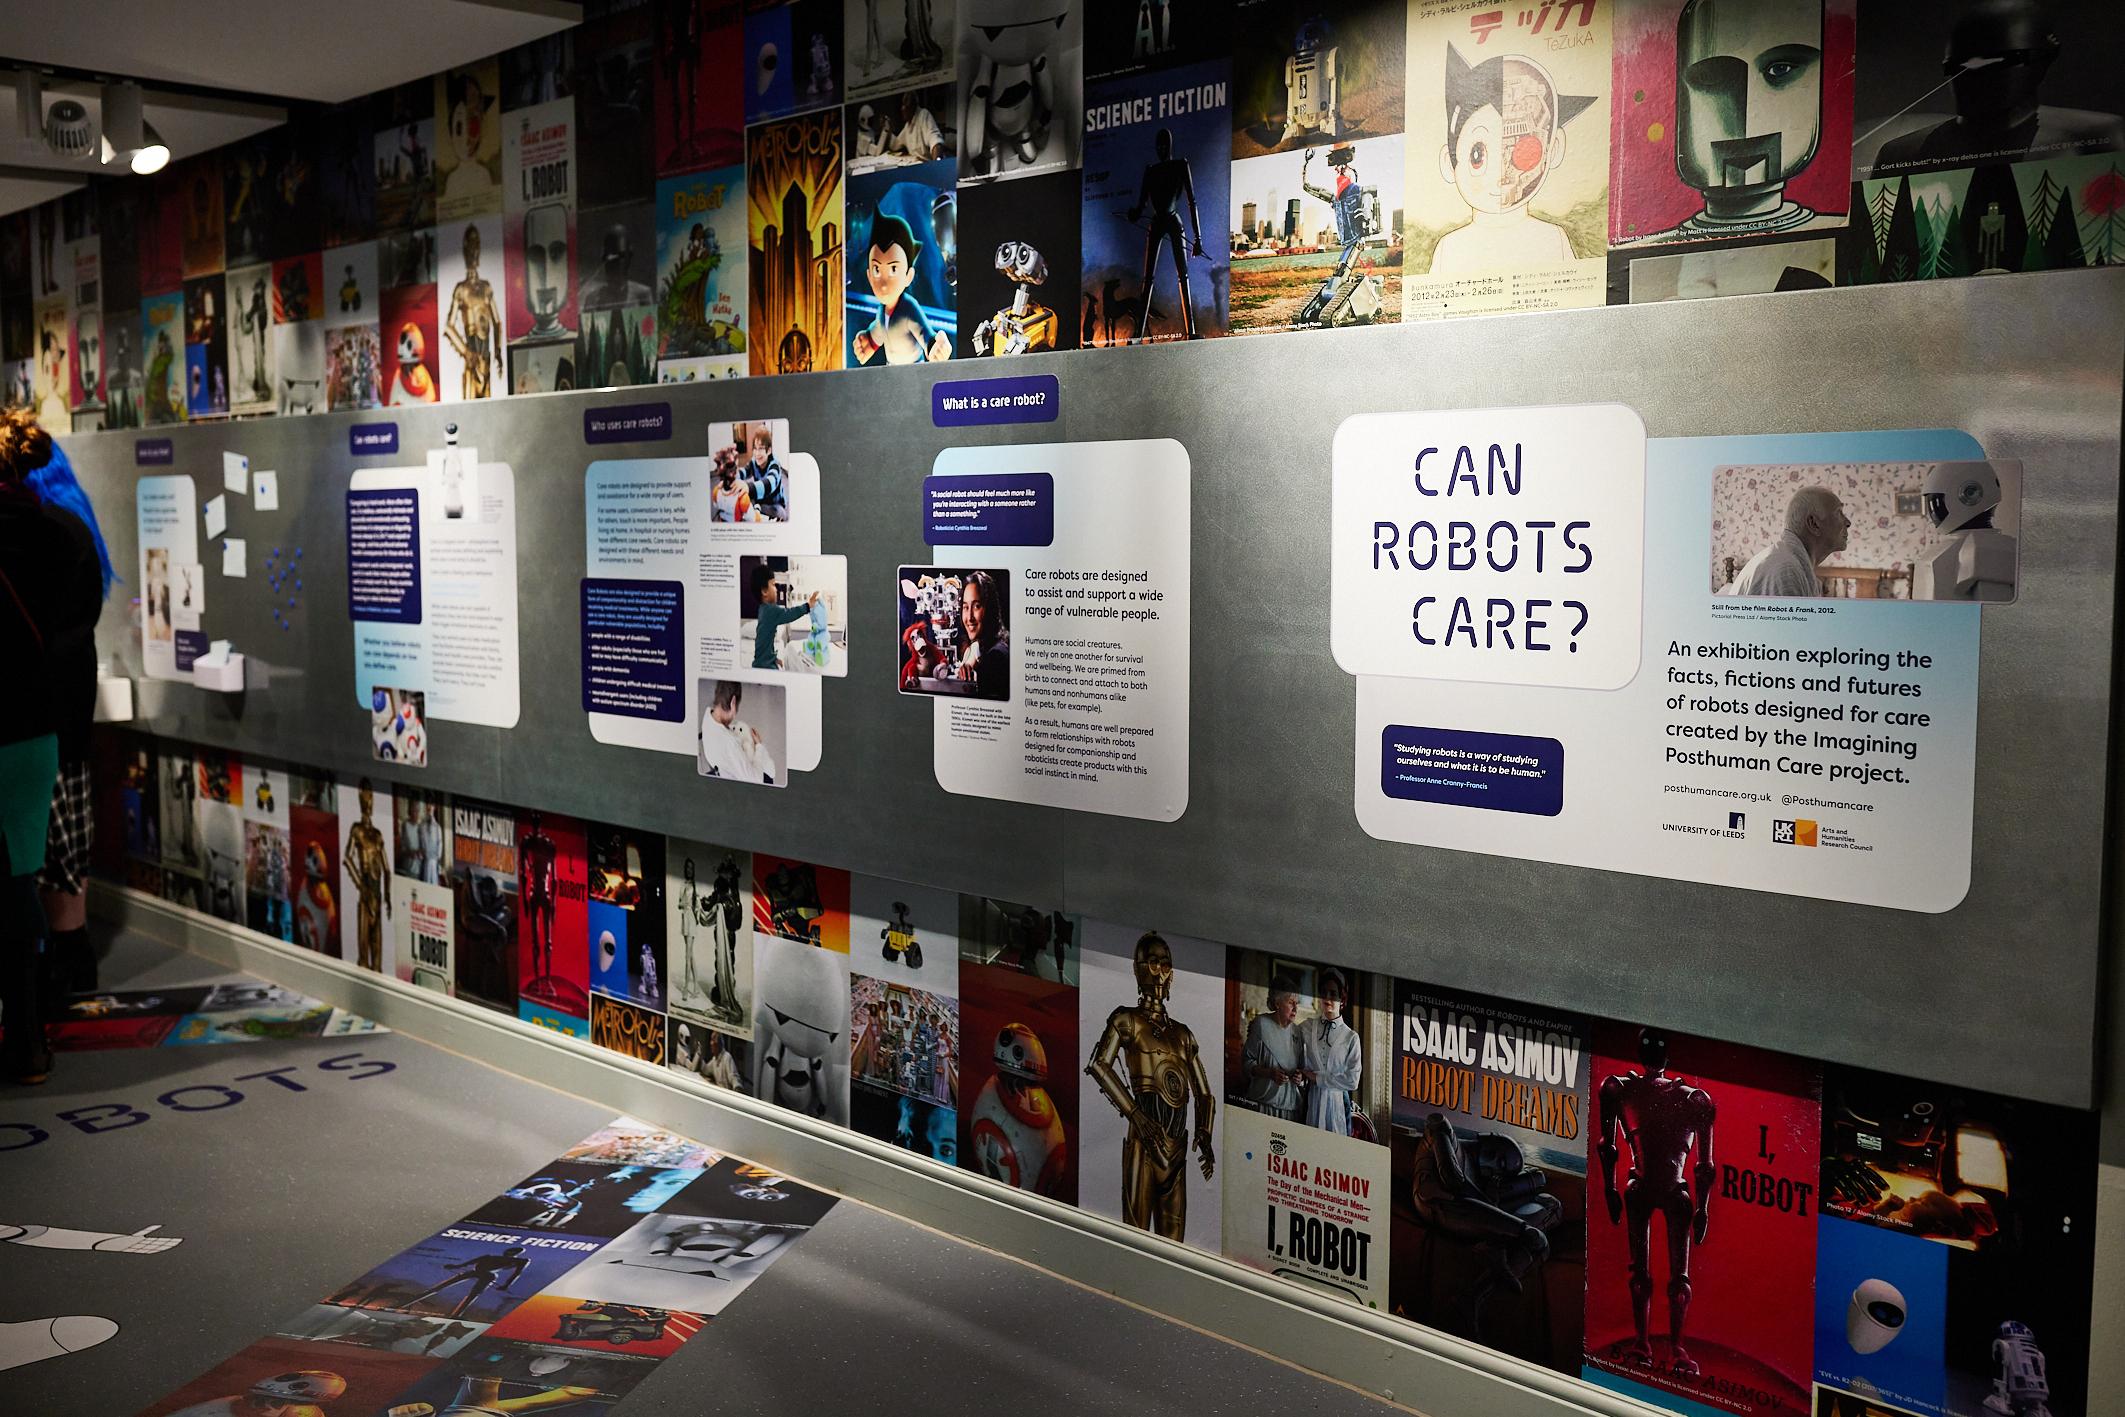 A wall display at the 'Can Robots Care?" exhibition in the Thackary Medical Museum.